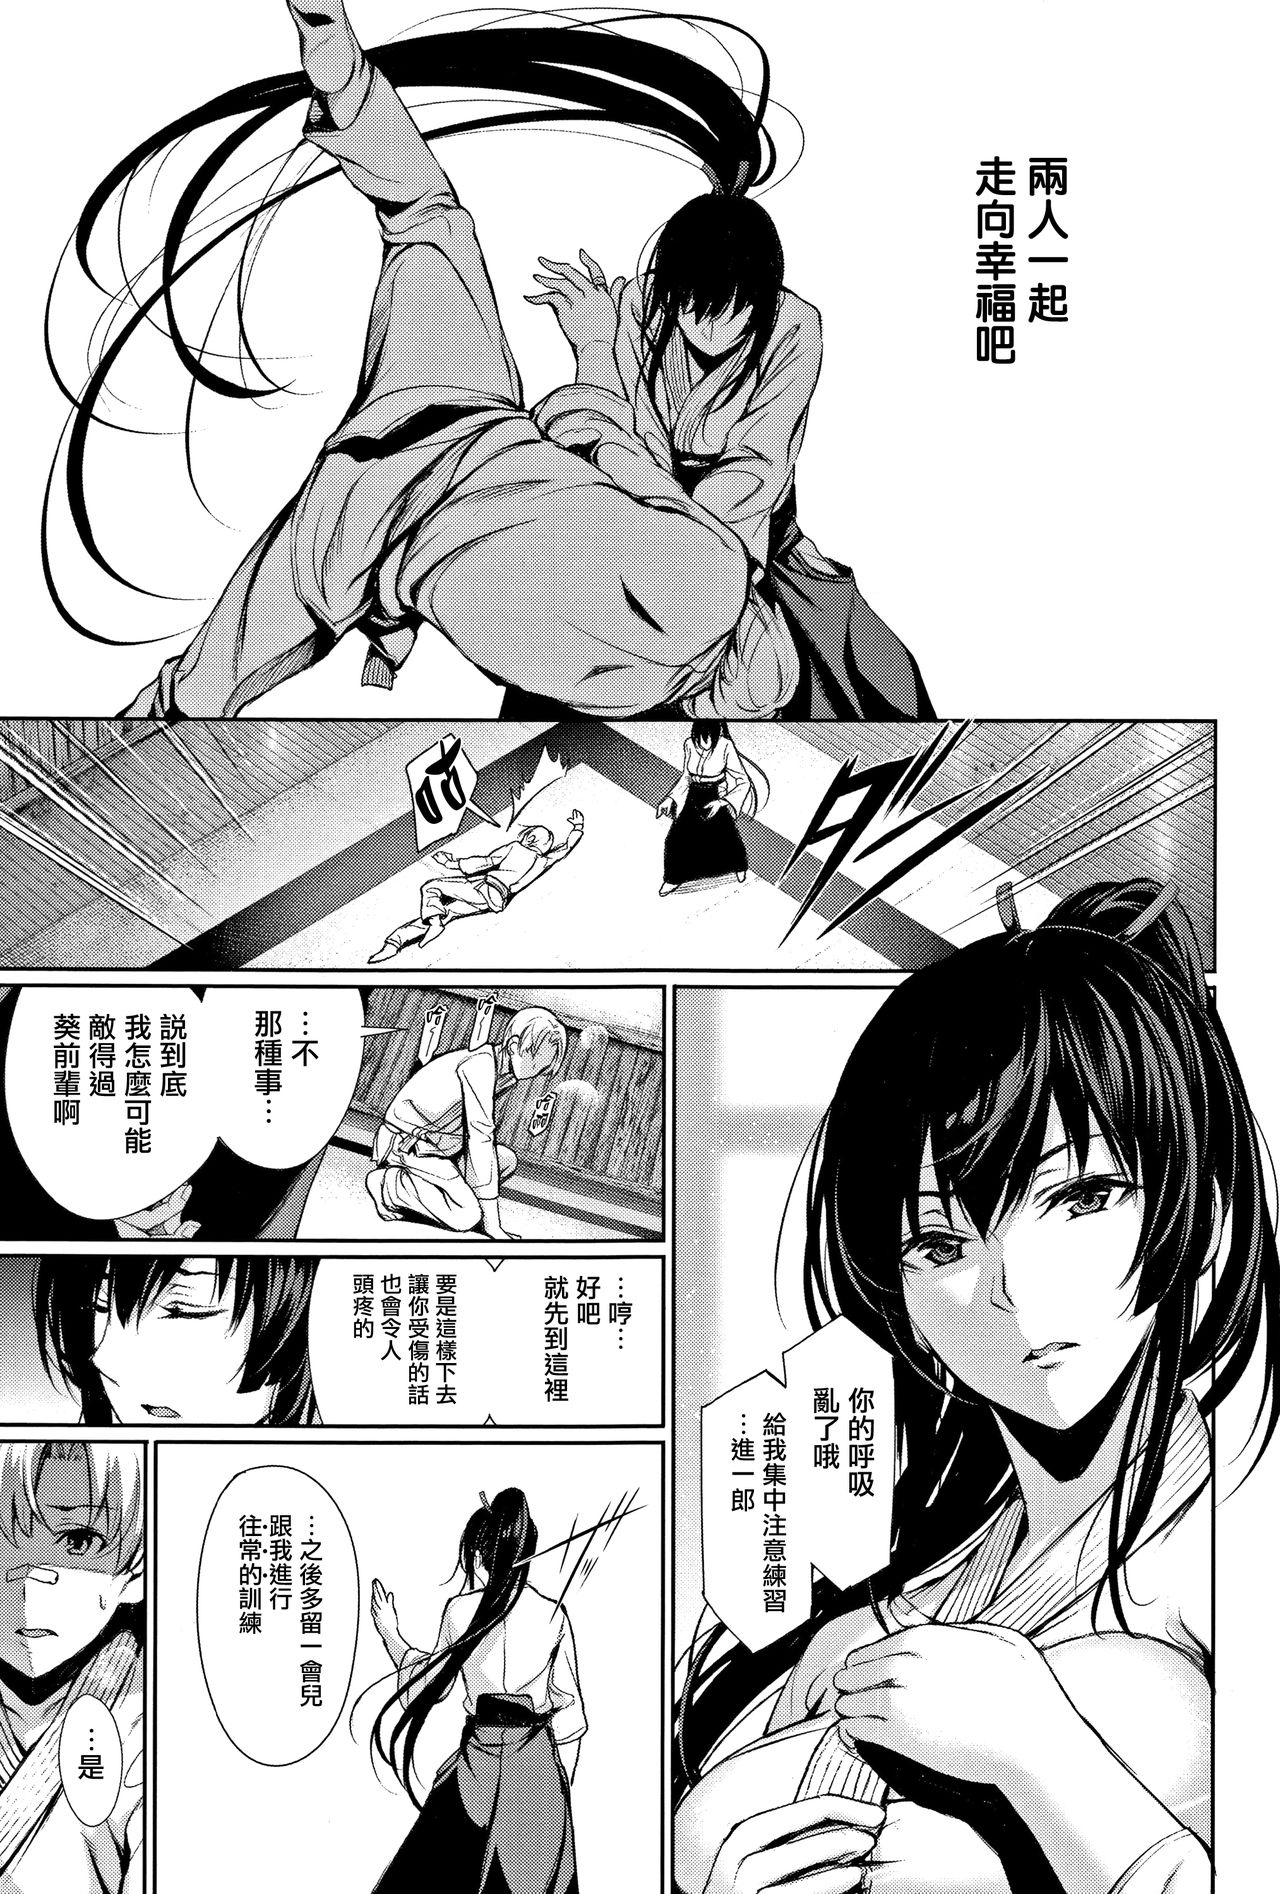 [Gentsuki] Kimi Omou Koi - I think of you. Ch. 1-2 [Chinese] [无毒汉化组] page 8 full